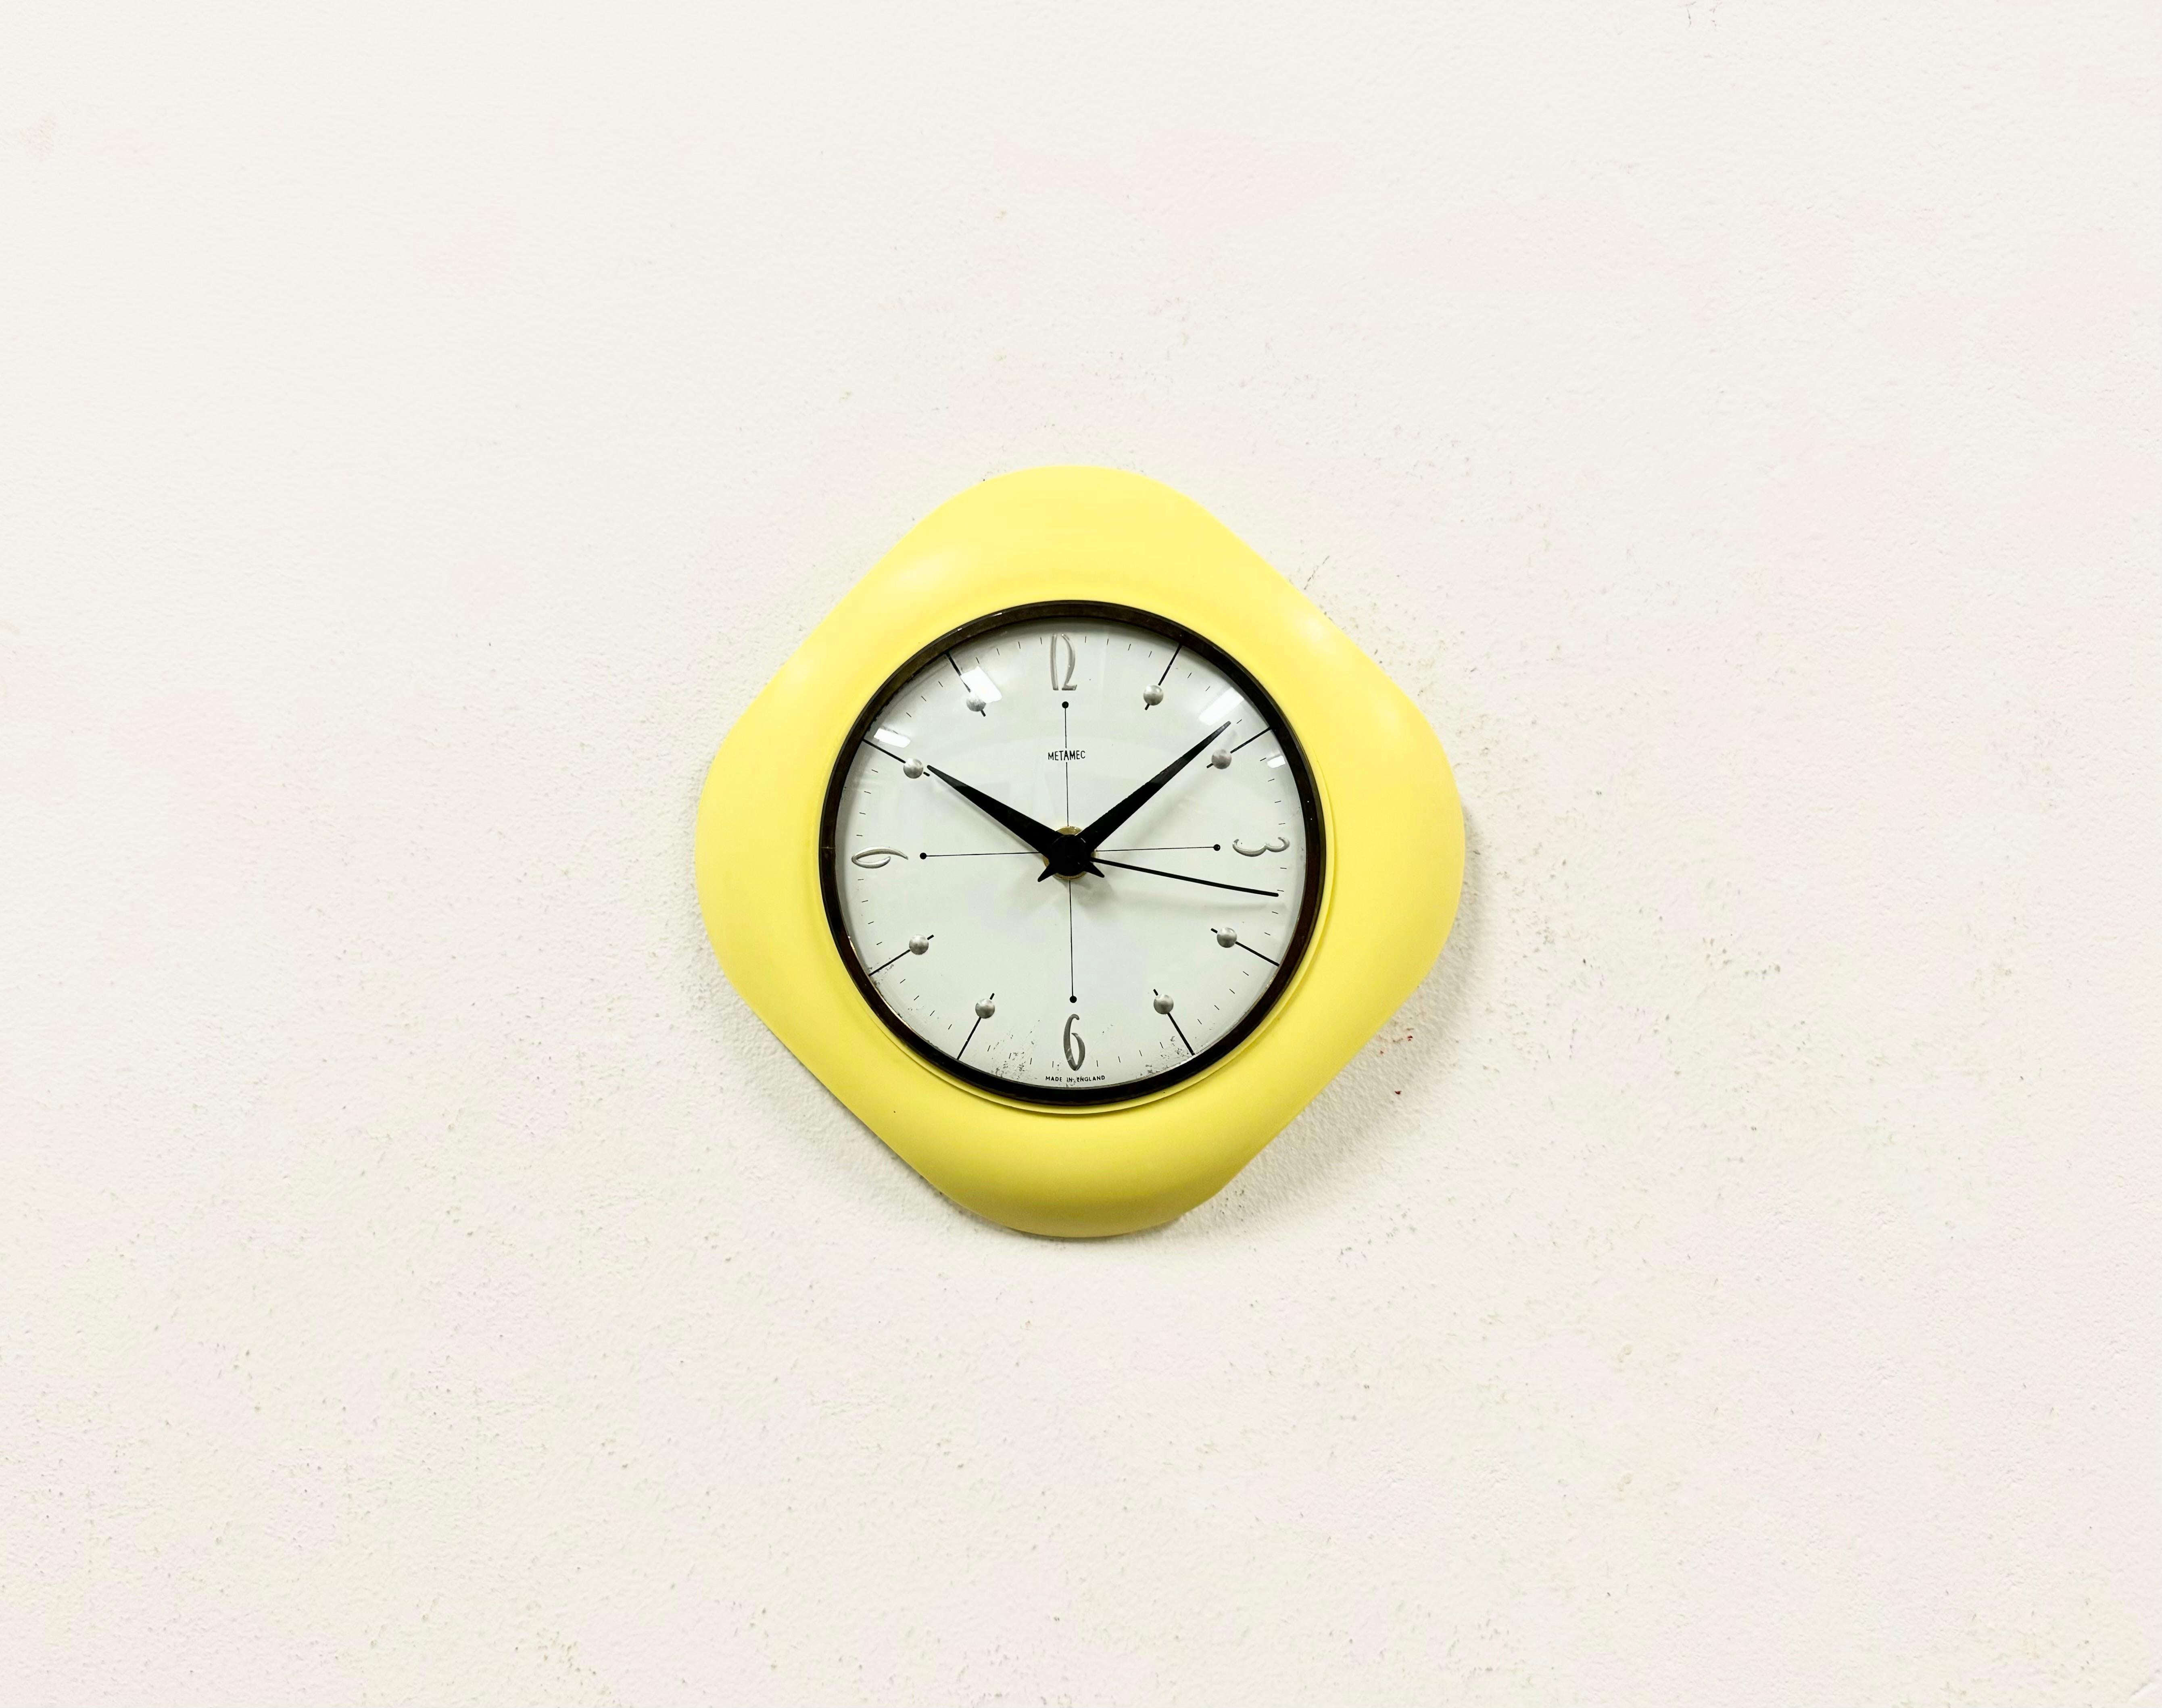 Metamec wall clock made in United Kingdom during the 1970s. It features a yellow bakelite body and a curved clear cover with brass ring. The piece has been converted into a battery-powered clockwork and requires only one AA-battery. The weight of